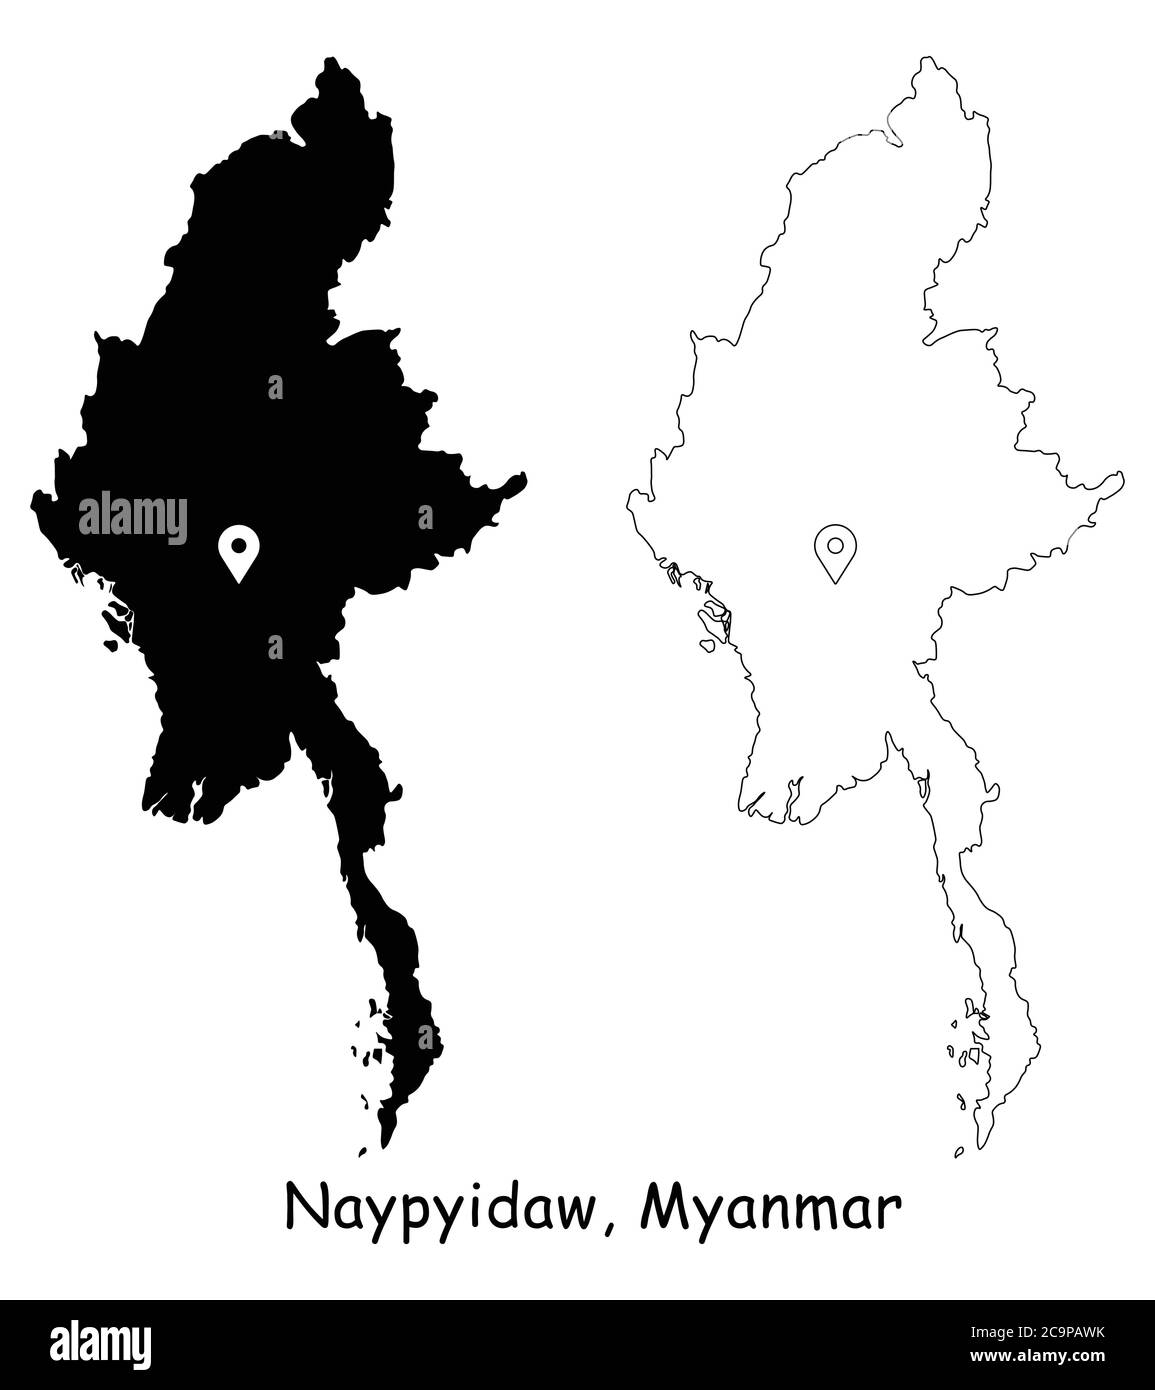 Naypyidaw, Myanmar. Detailed Country Map with Location Pin on Capital City. Black silhouette and outline maps isolated on white background. EPS Vector Stock Vector